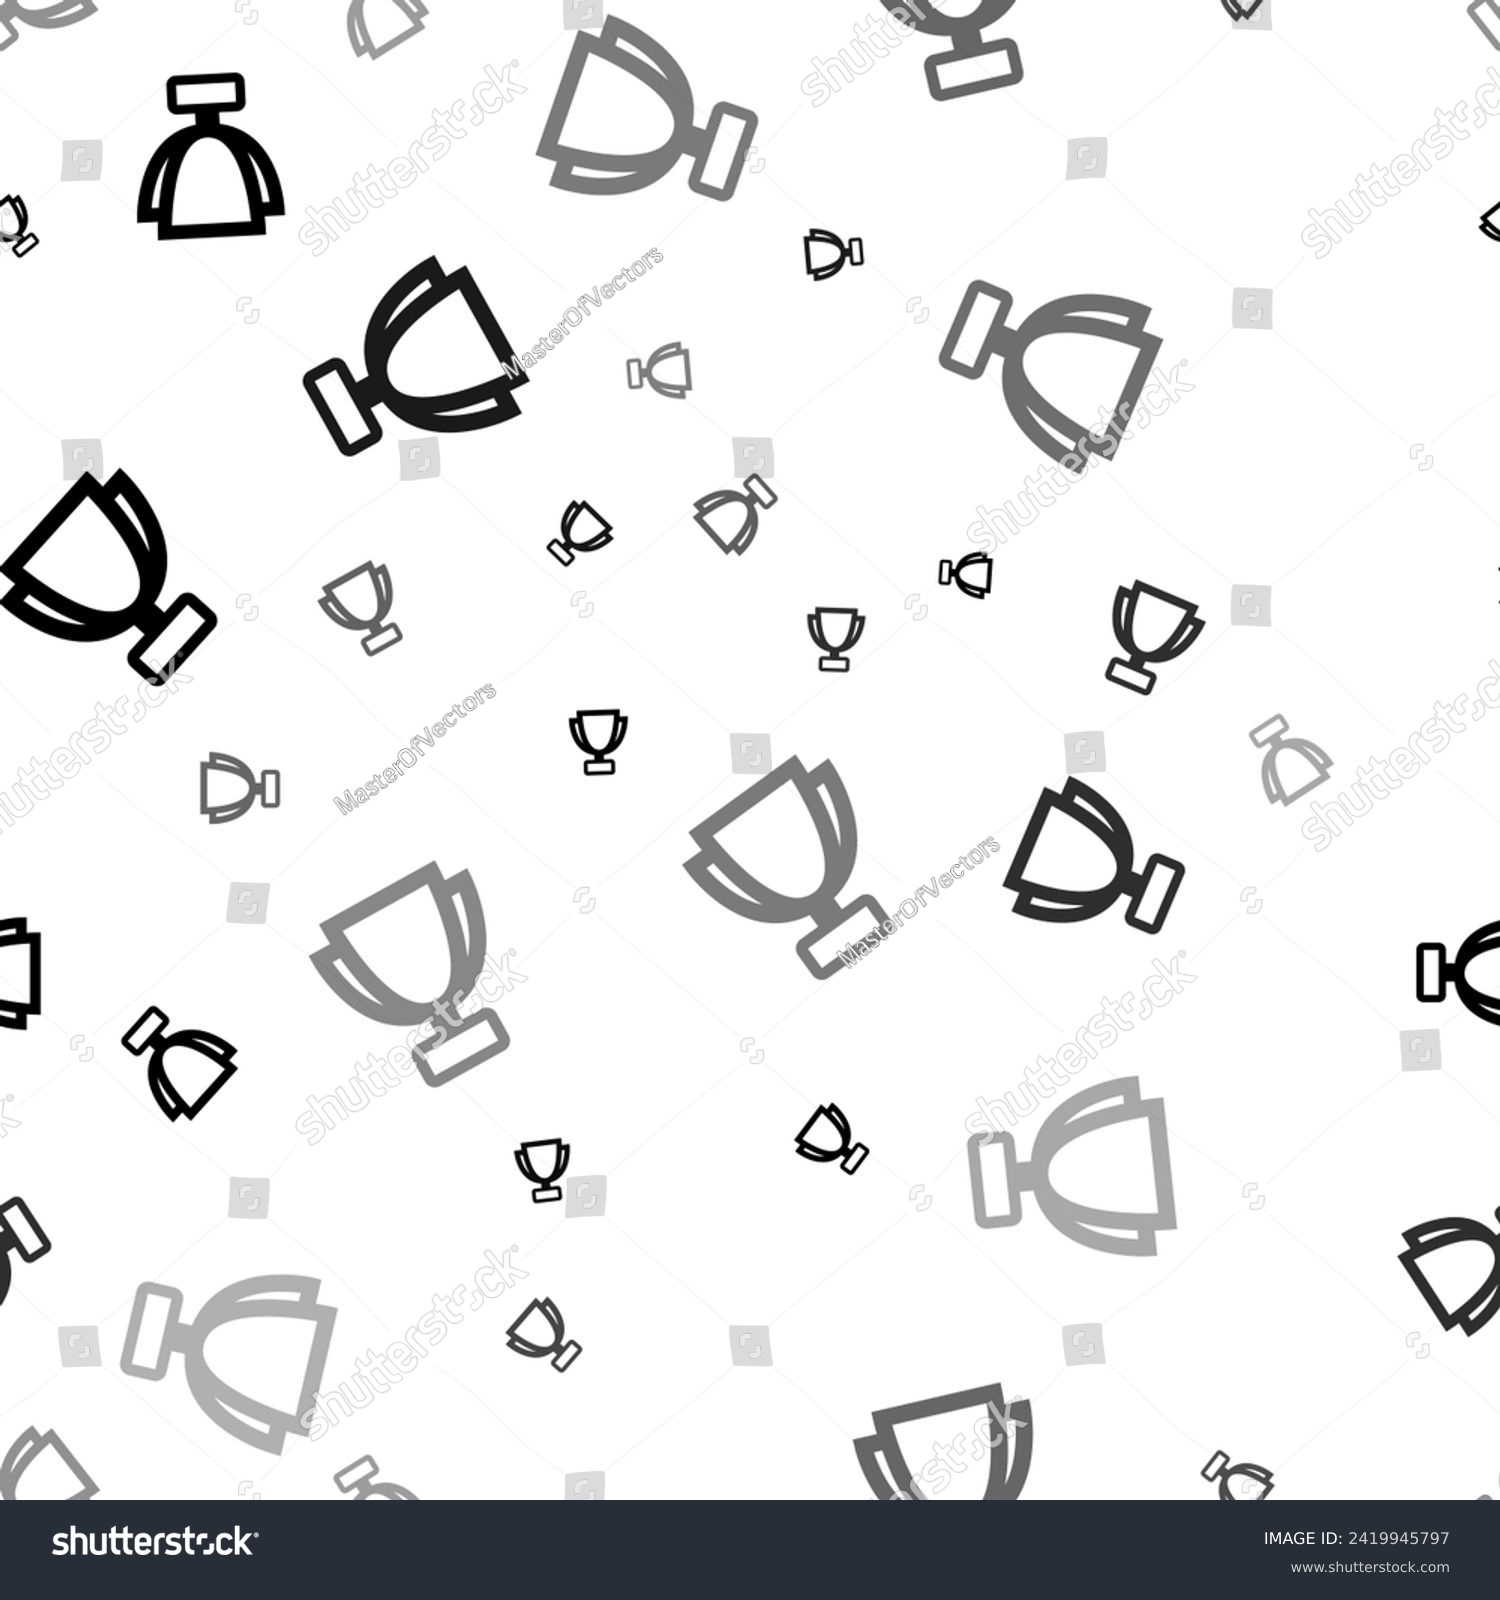 SVG of Seamless vector pattern with trophy symbols, creating a creative monochrome background with rotated elements. Vector illustration on white background svg